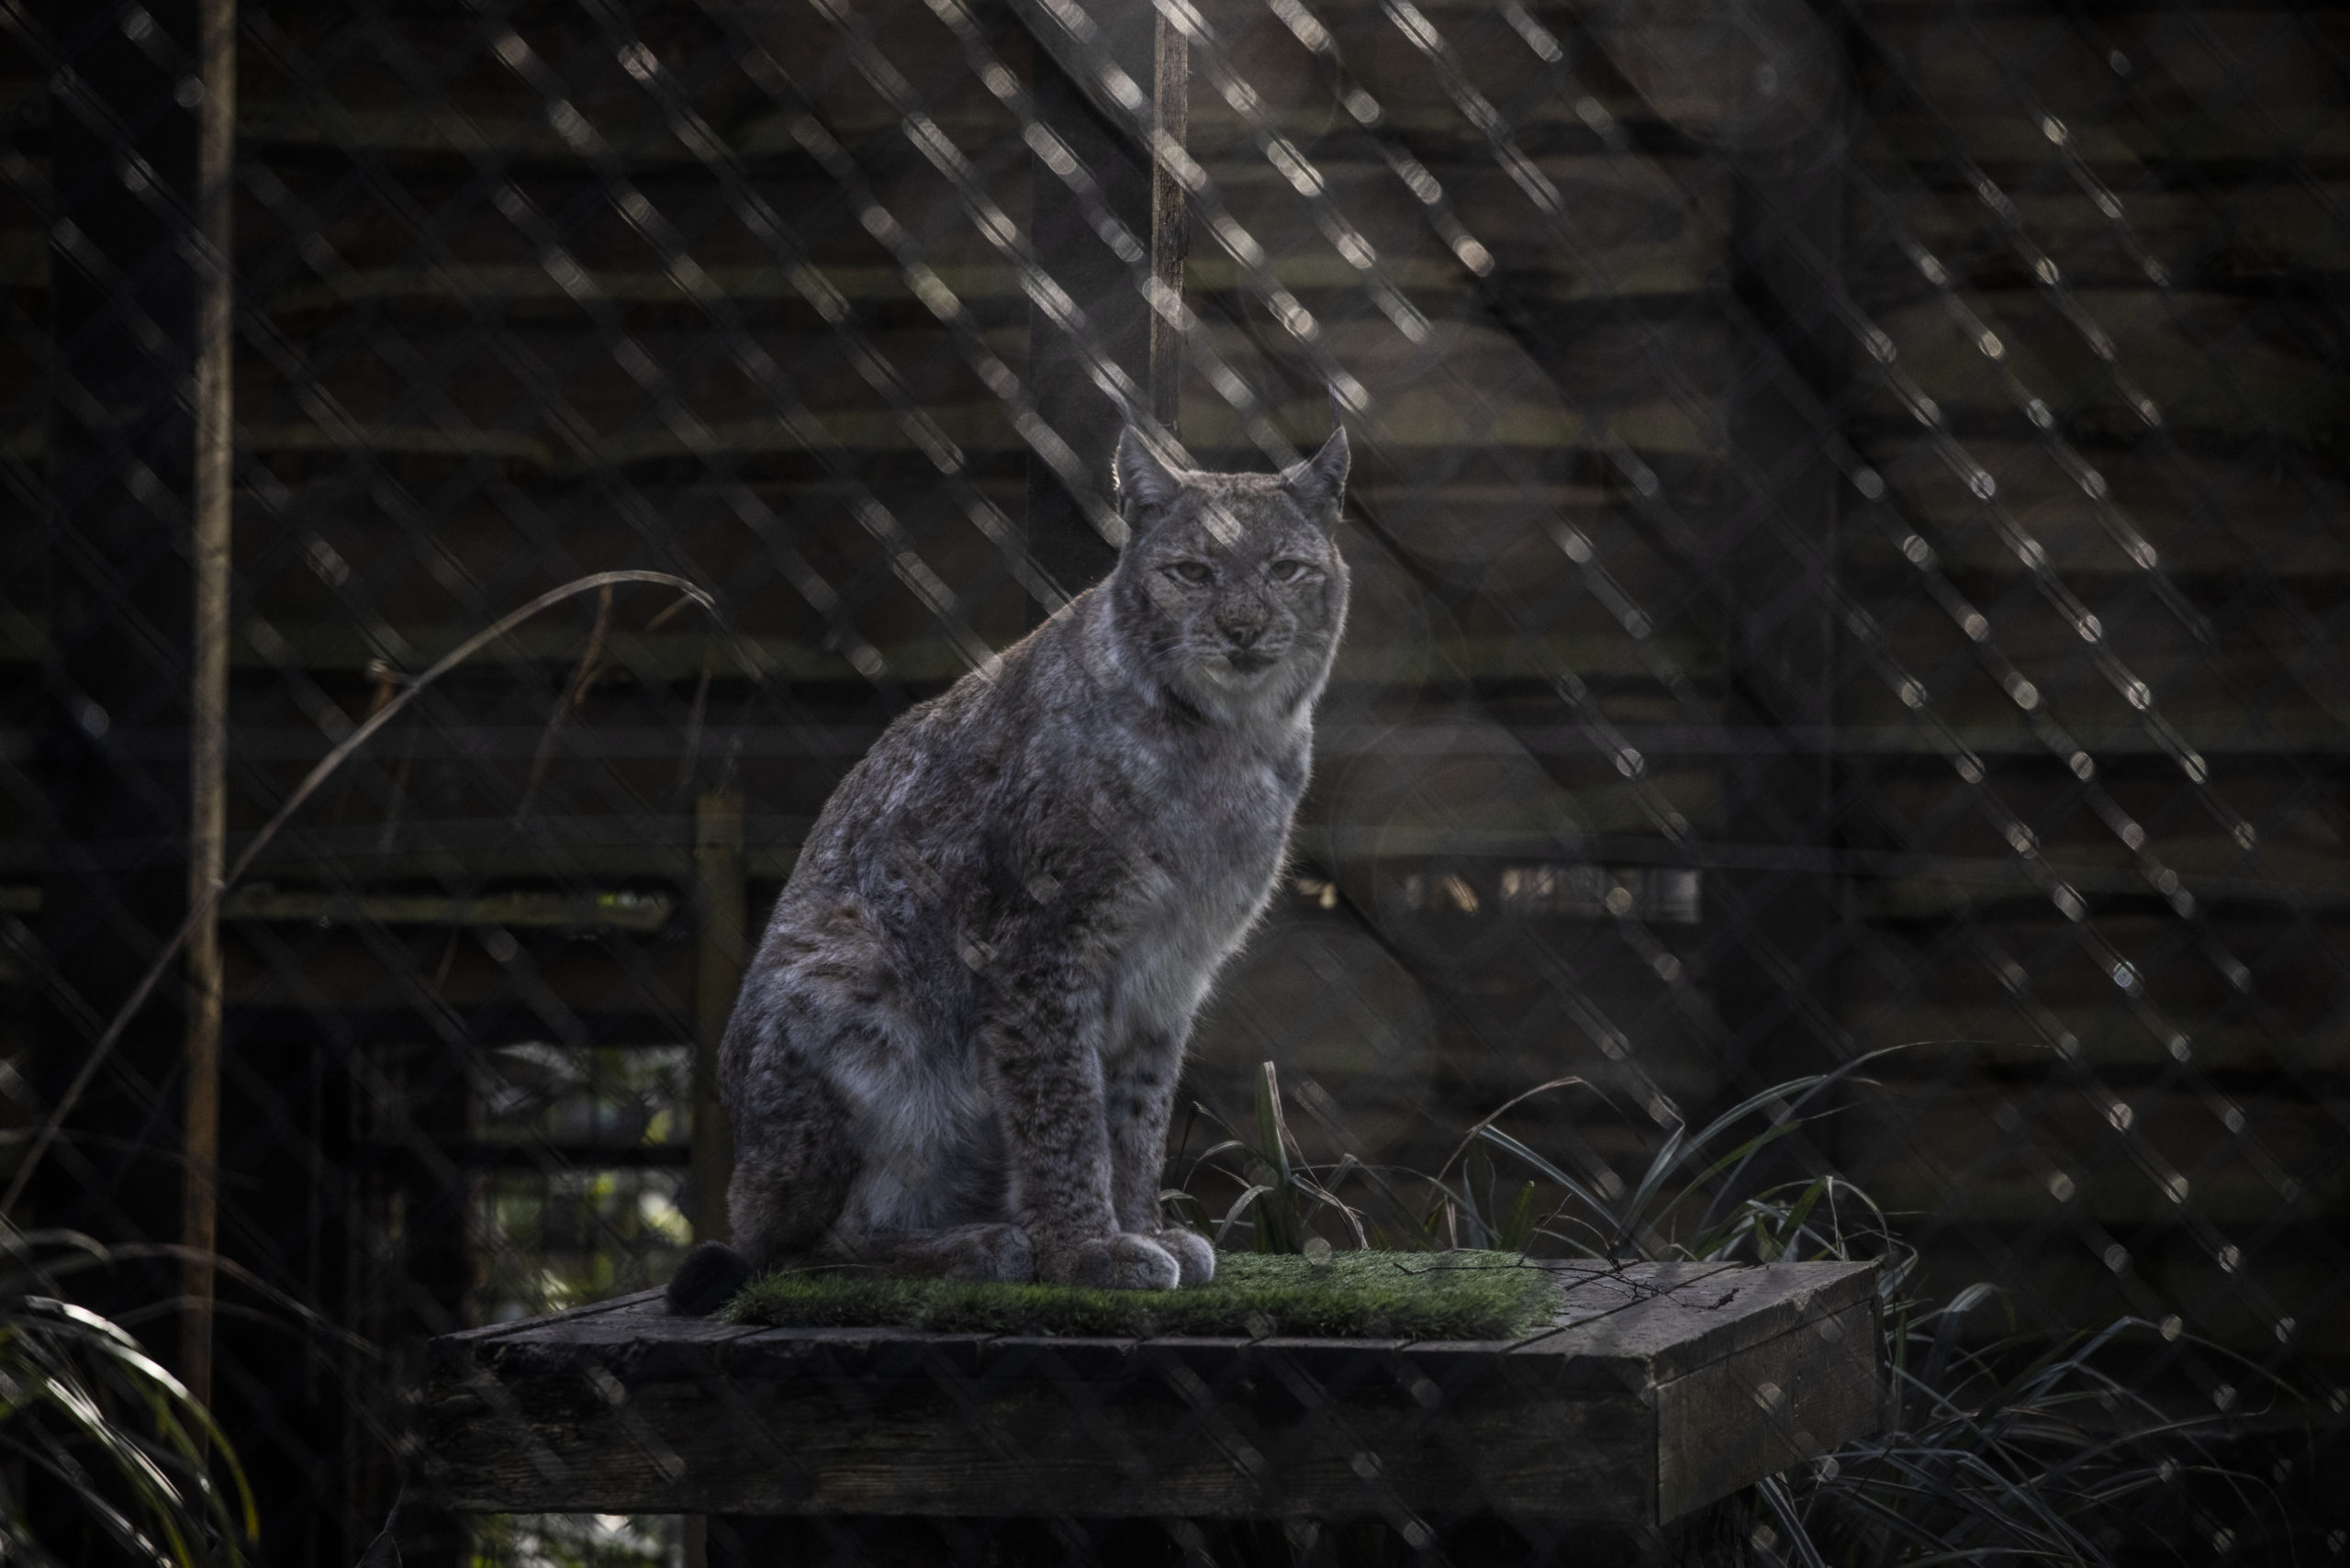 A lynx in its enclosure in Wildwood. (Photo: Dan Kitwood, Getty Images)